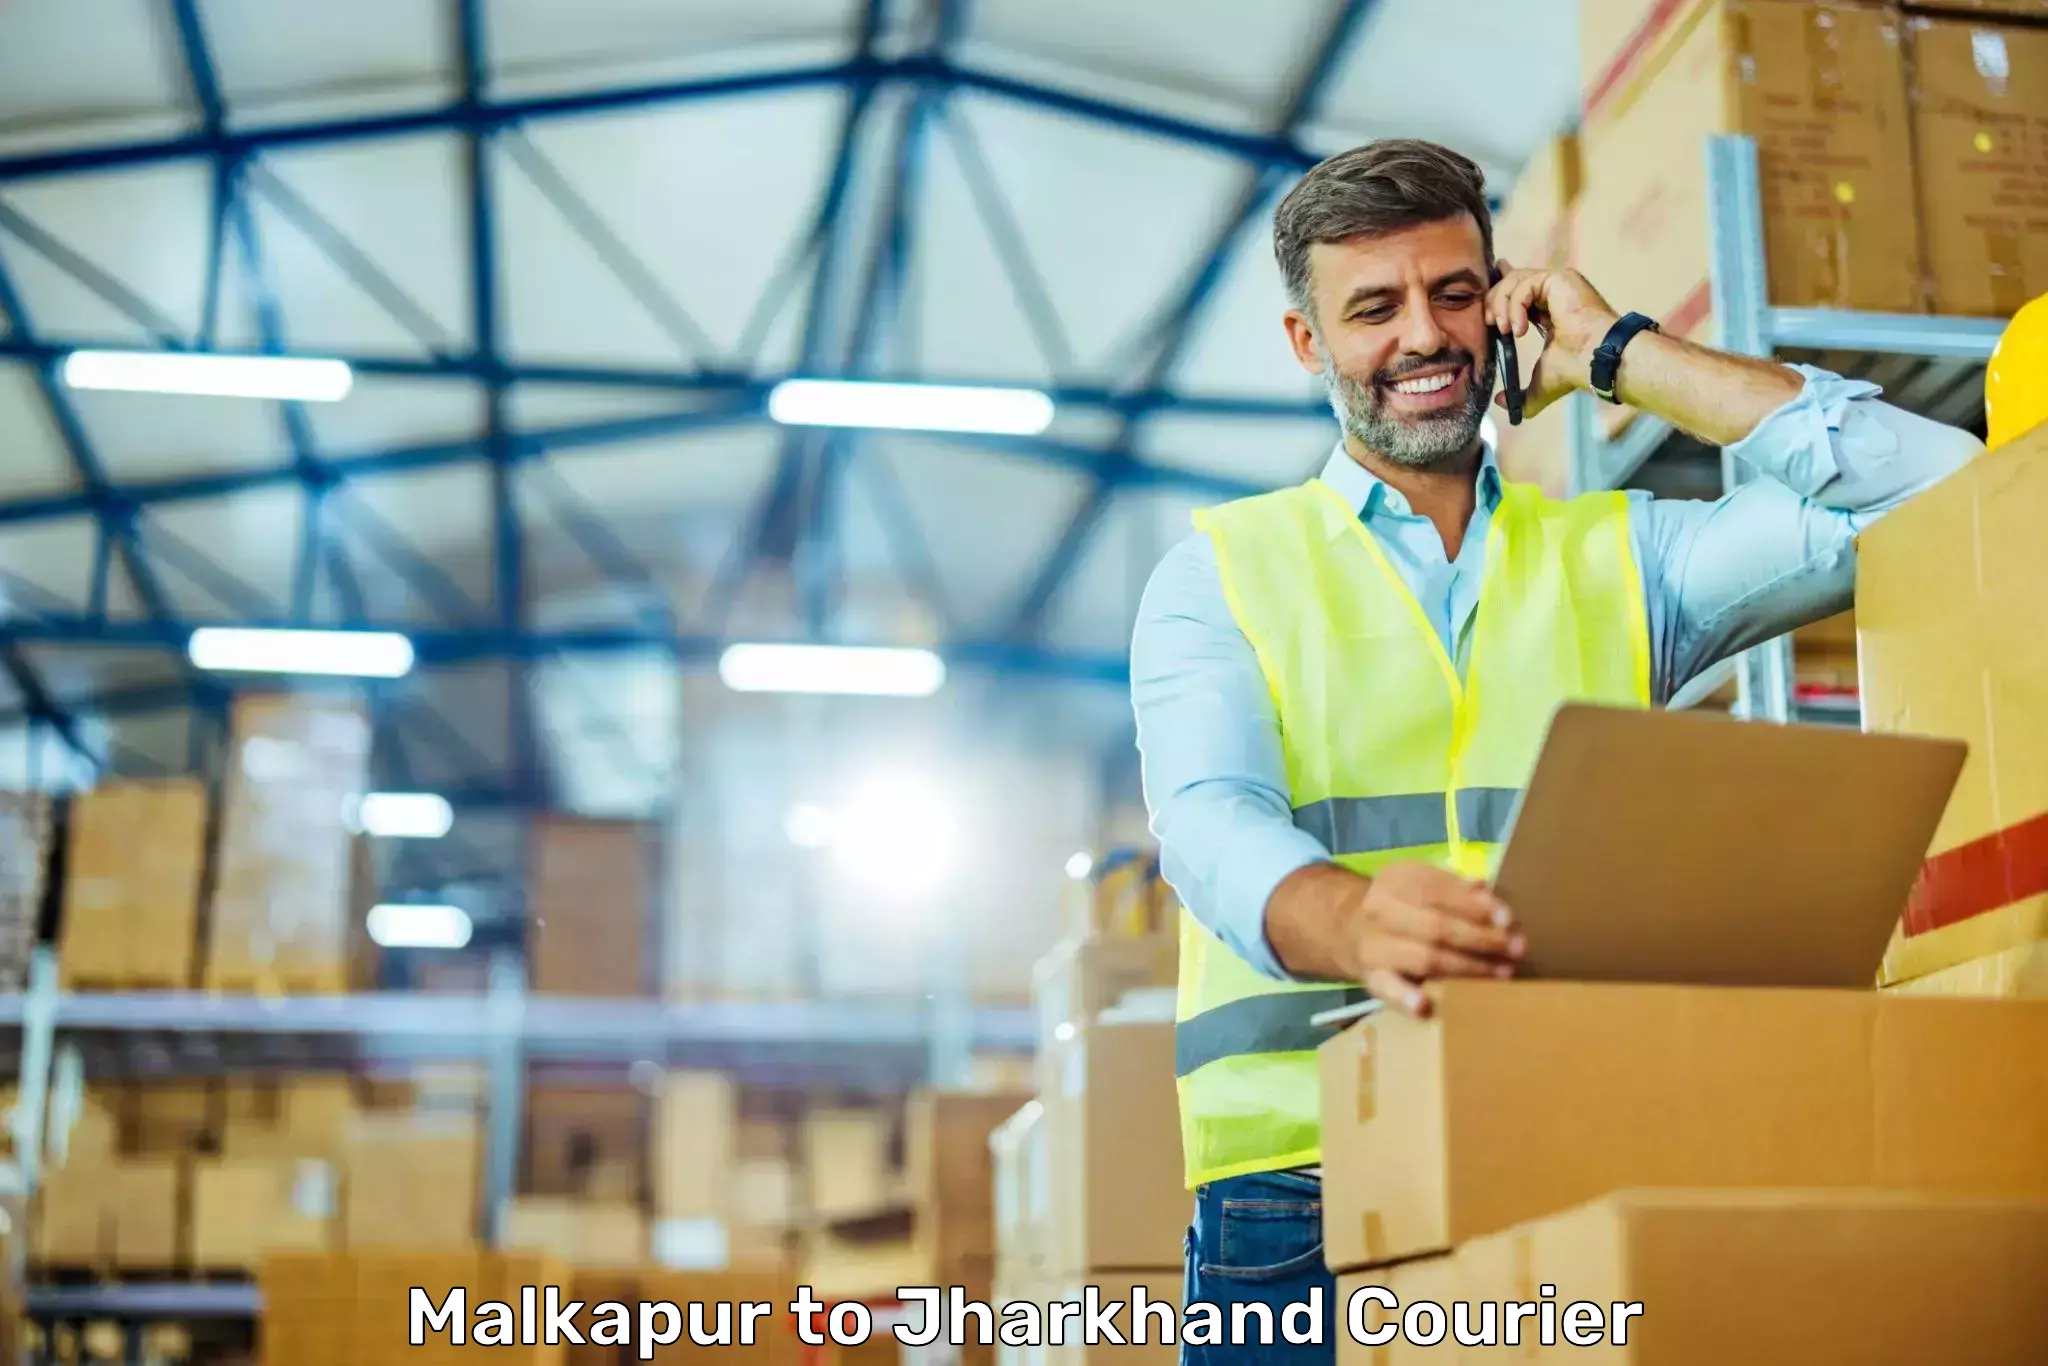 24-hour courier service Malkapur to Jharkhand